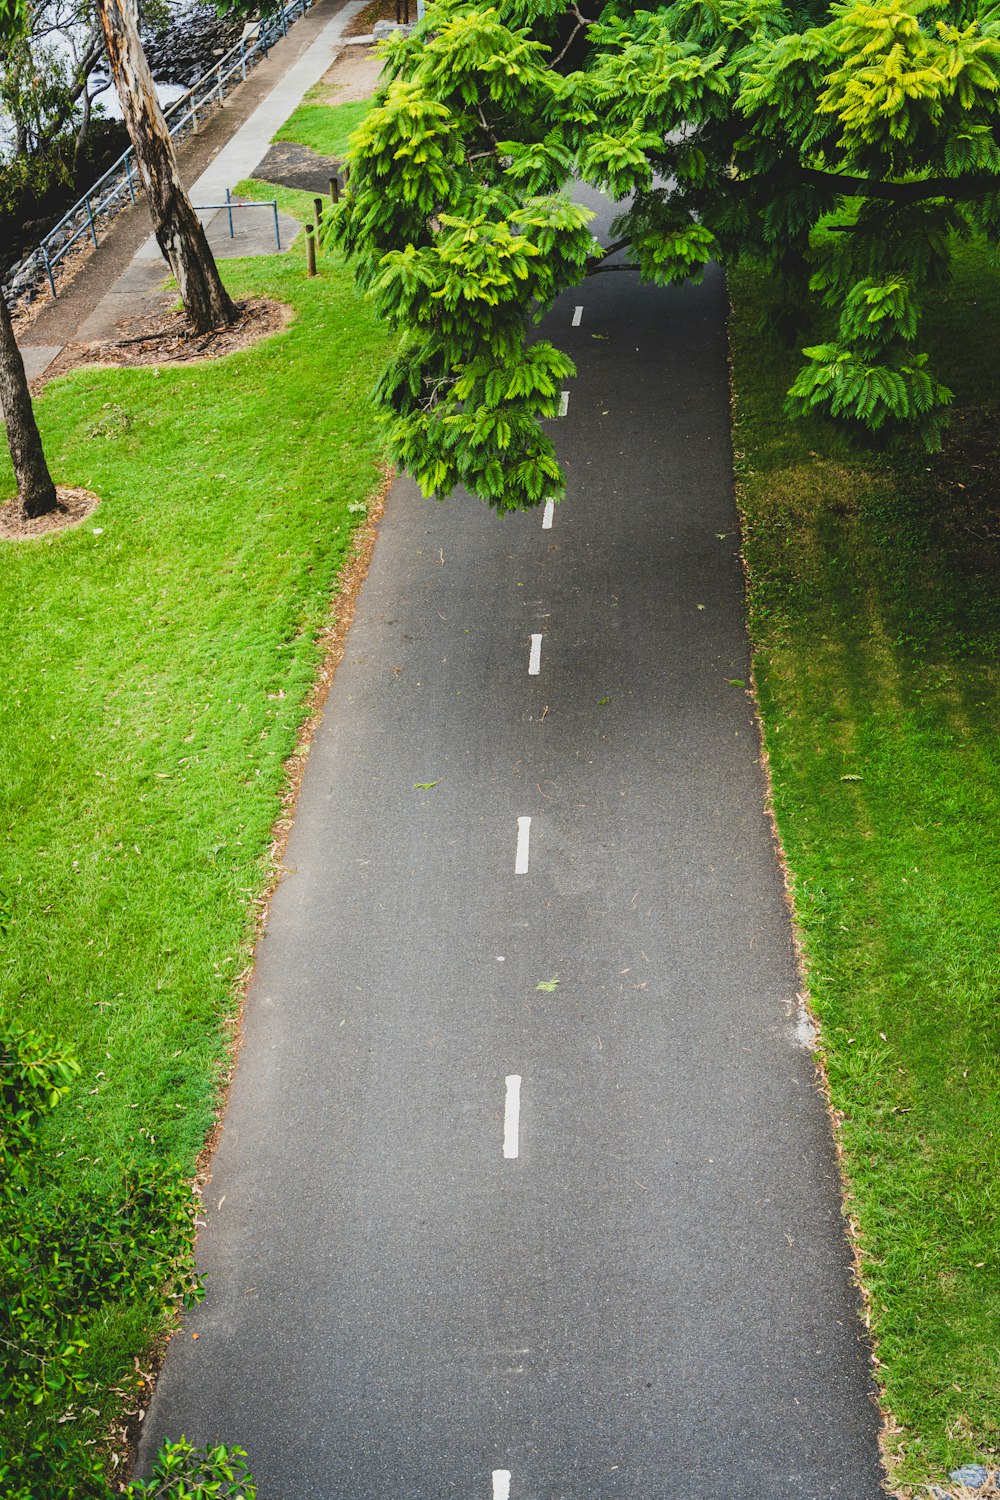 a paved road surrounded by trees and grass